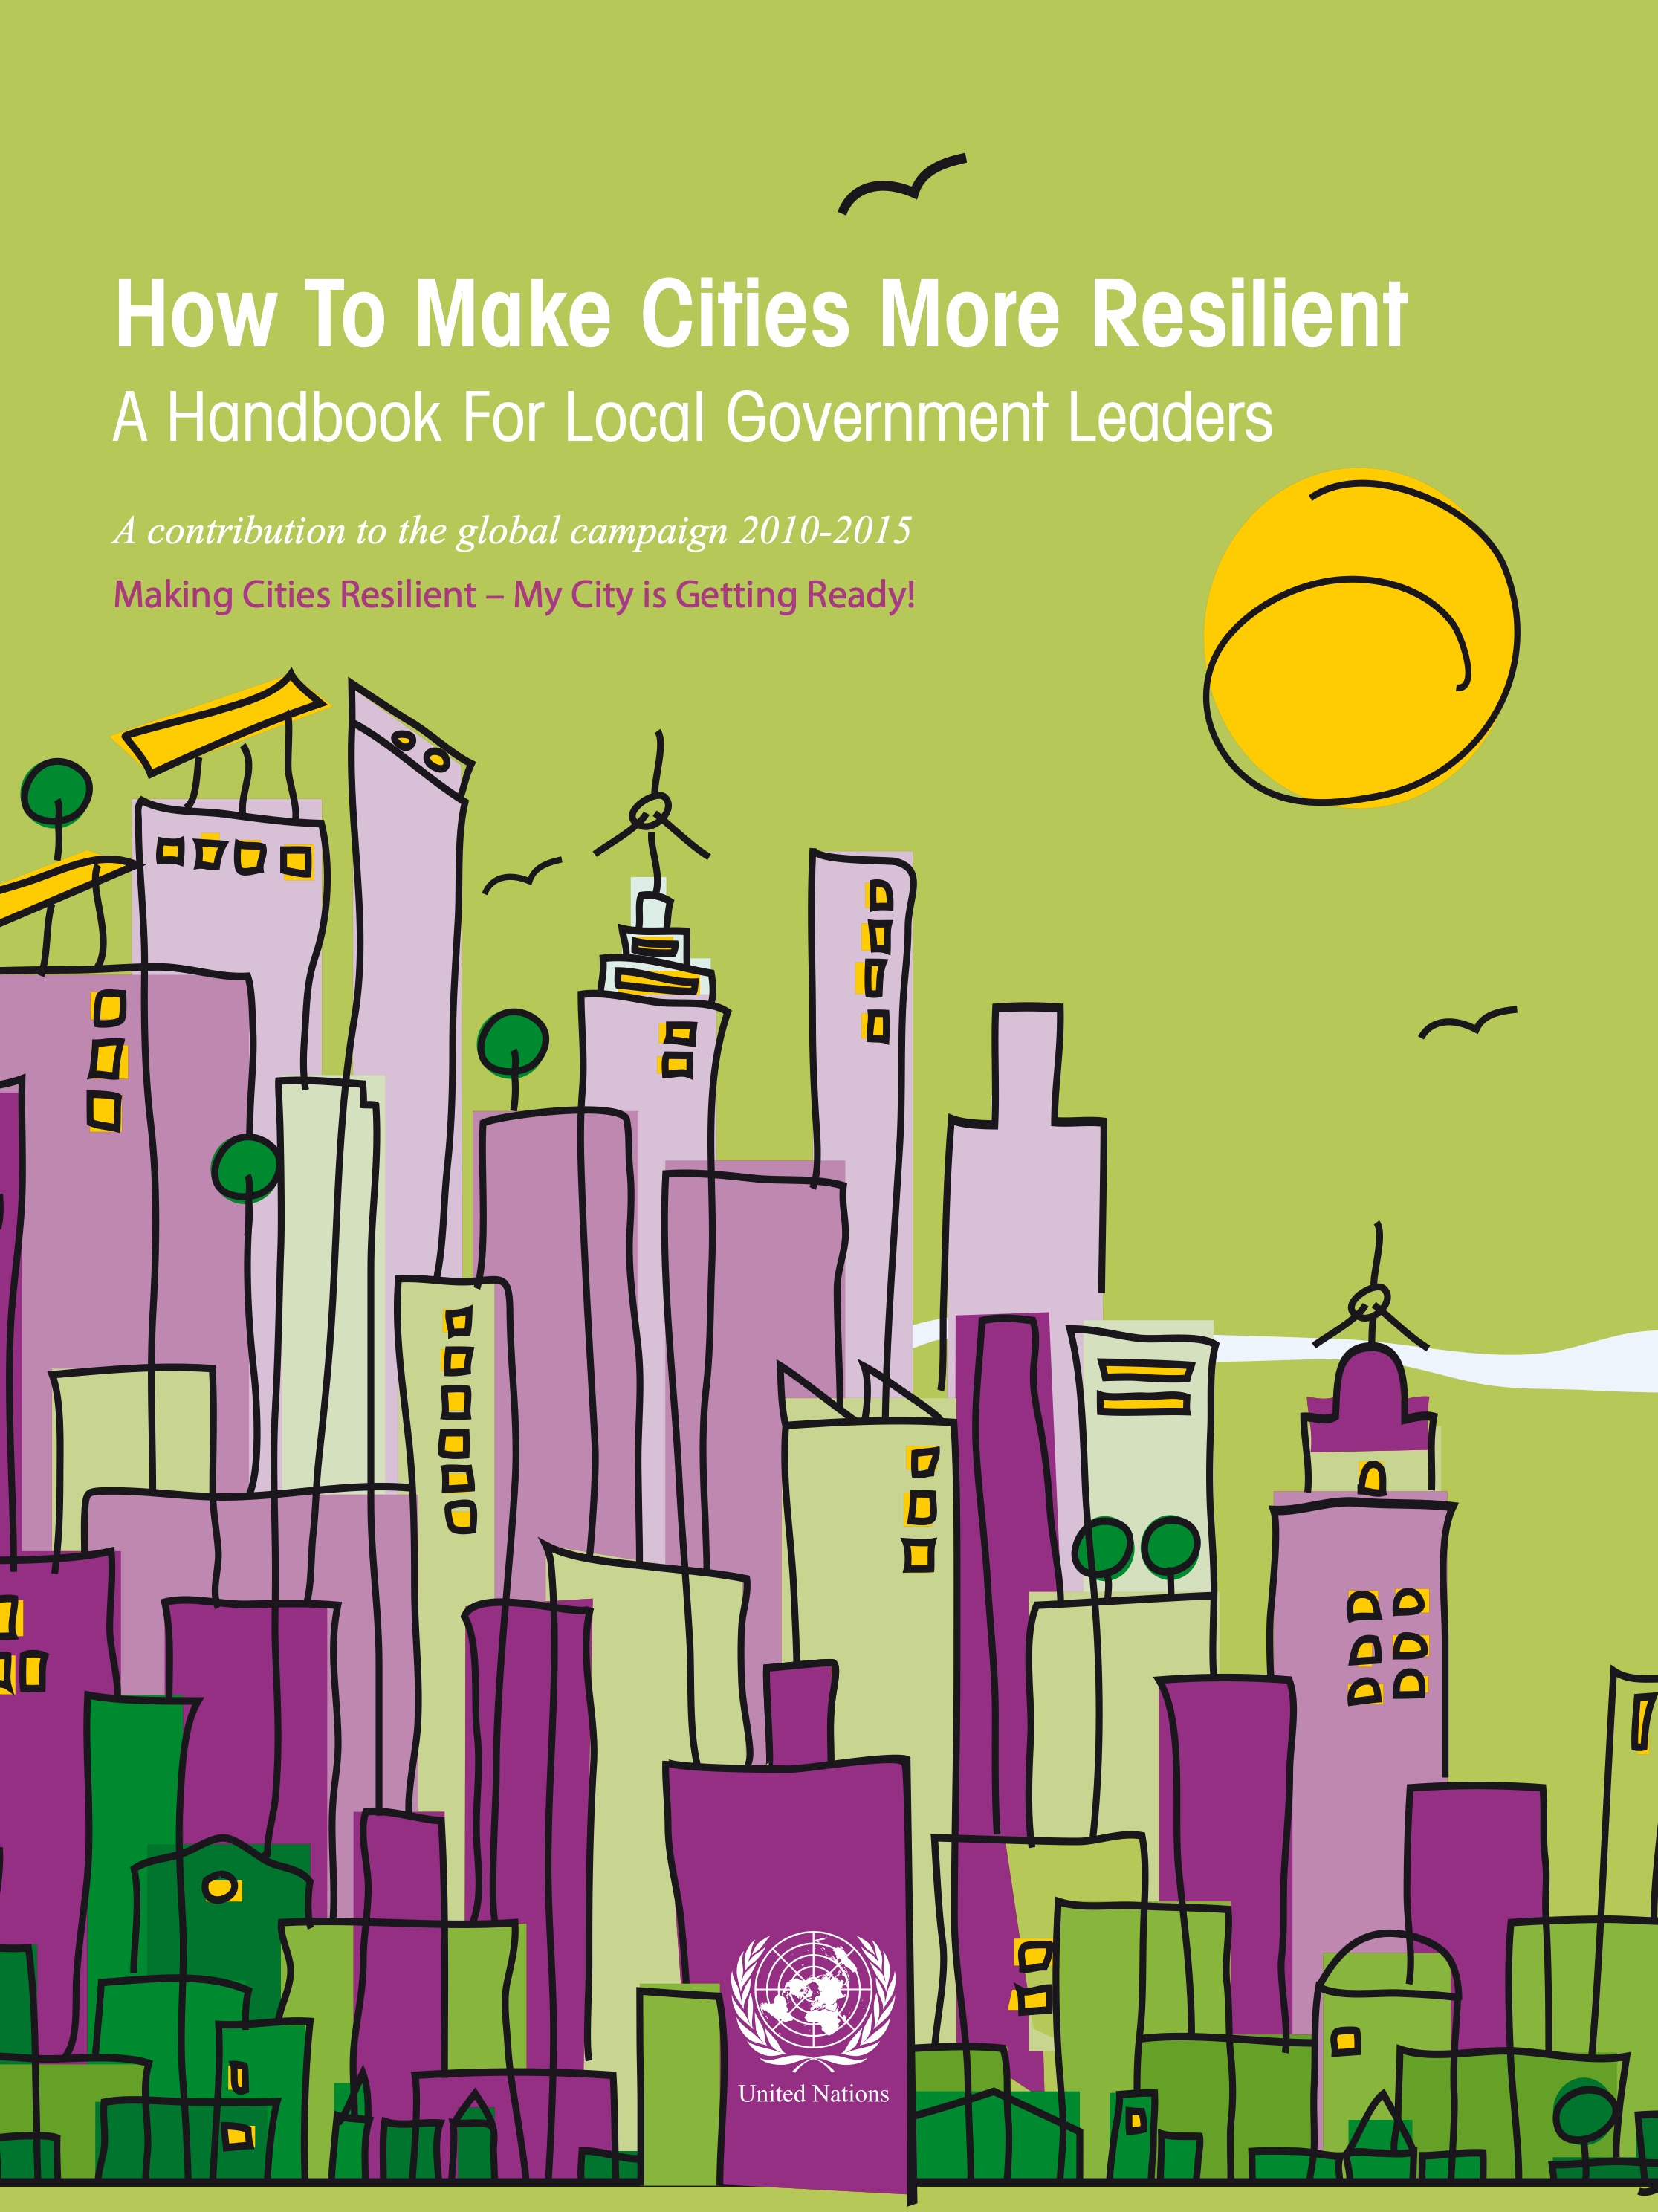 How To Make Cities More Resilient